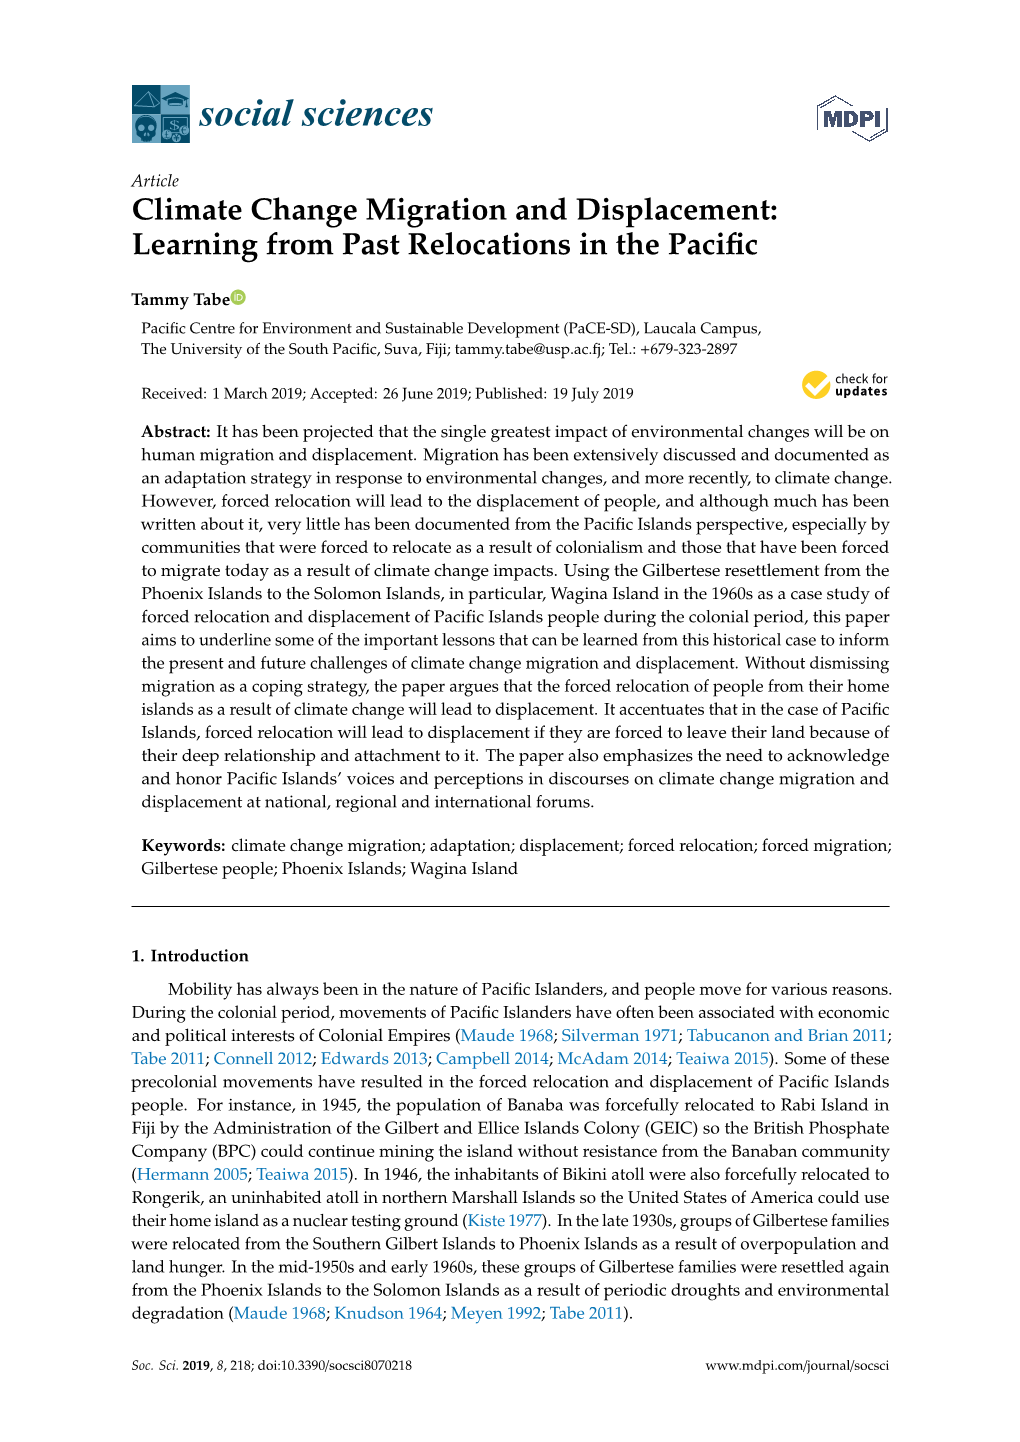 Climate Change Migration and Displacement: Learning from Past Relocations in the Paciﬁc